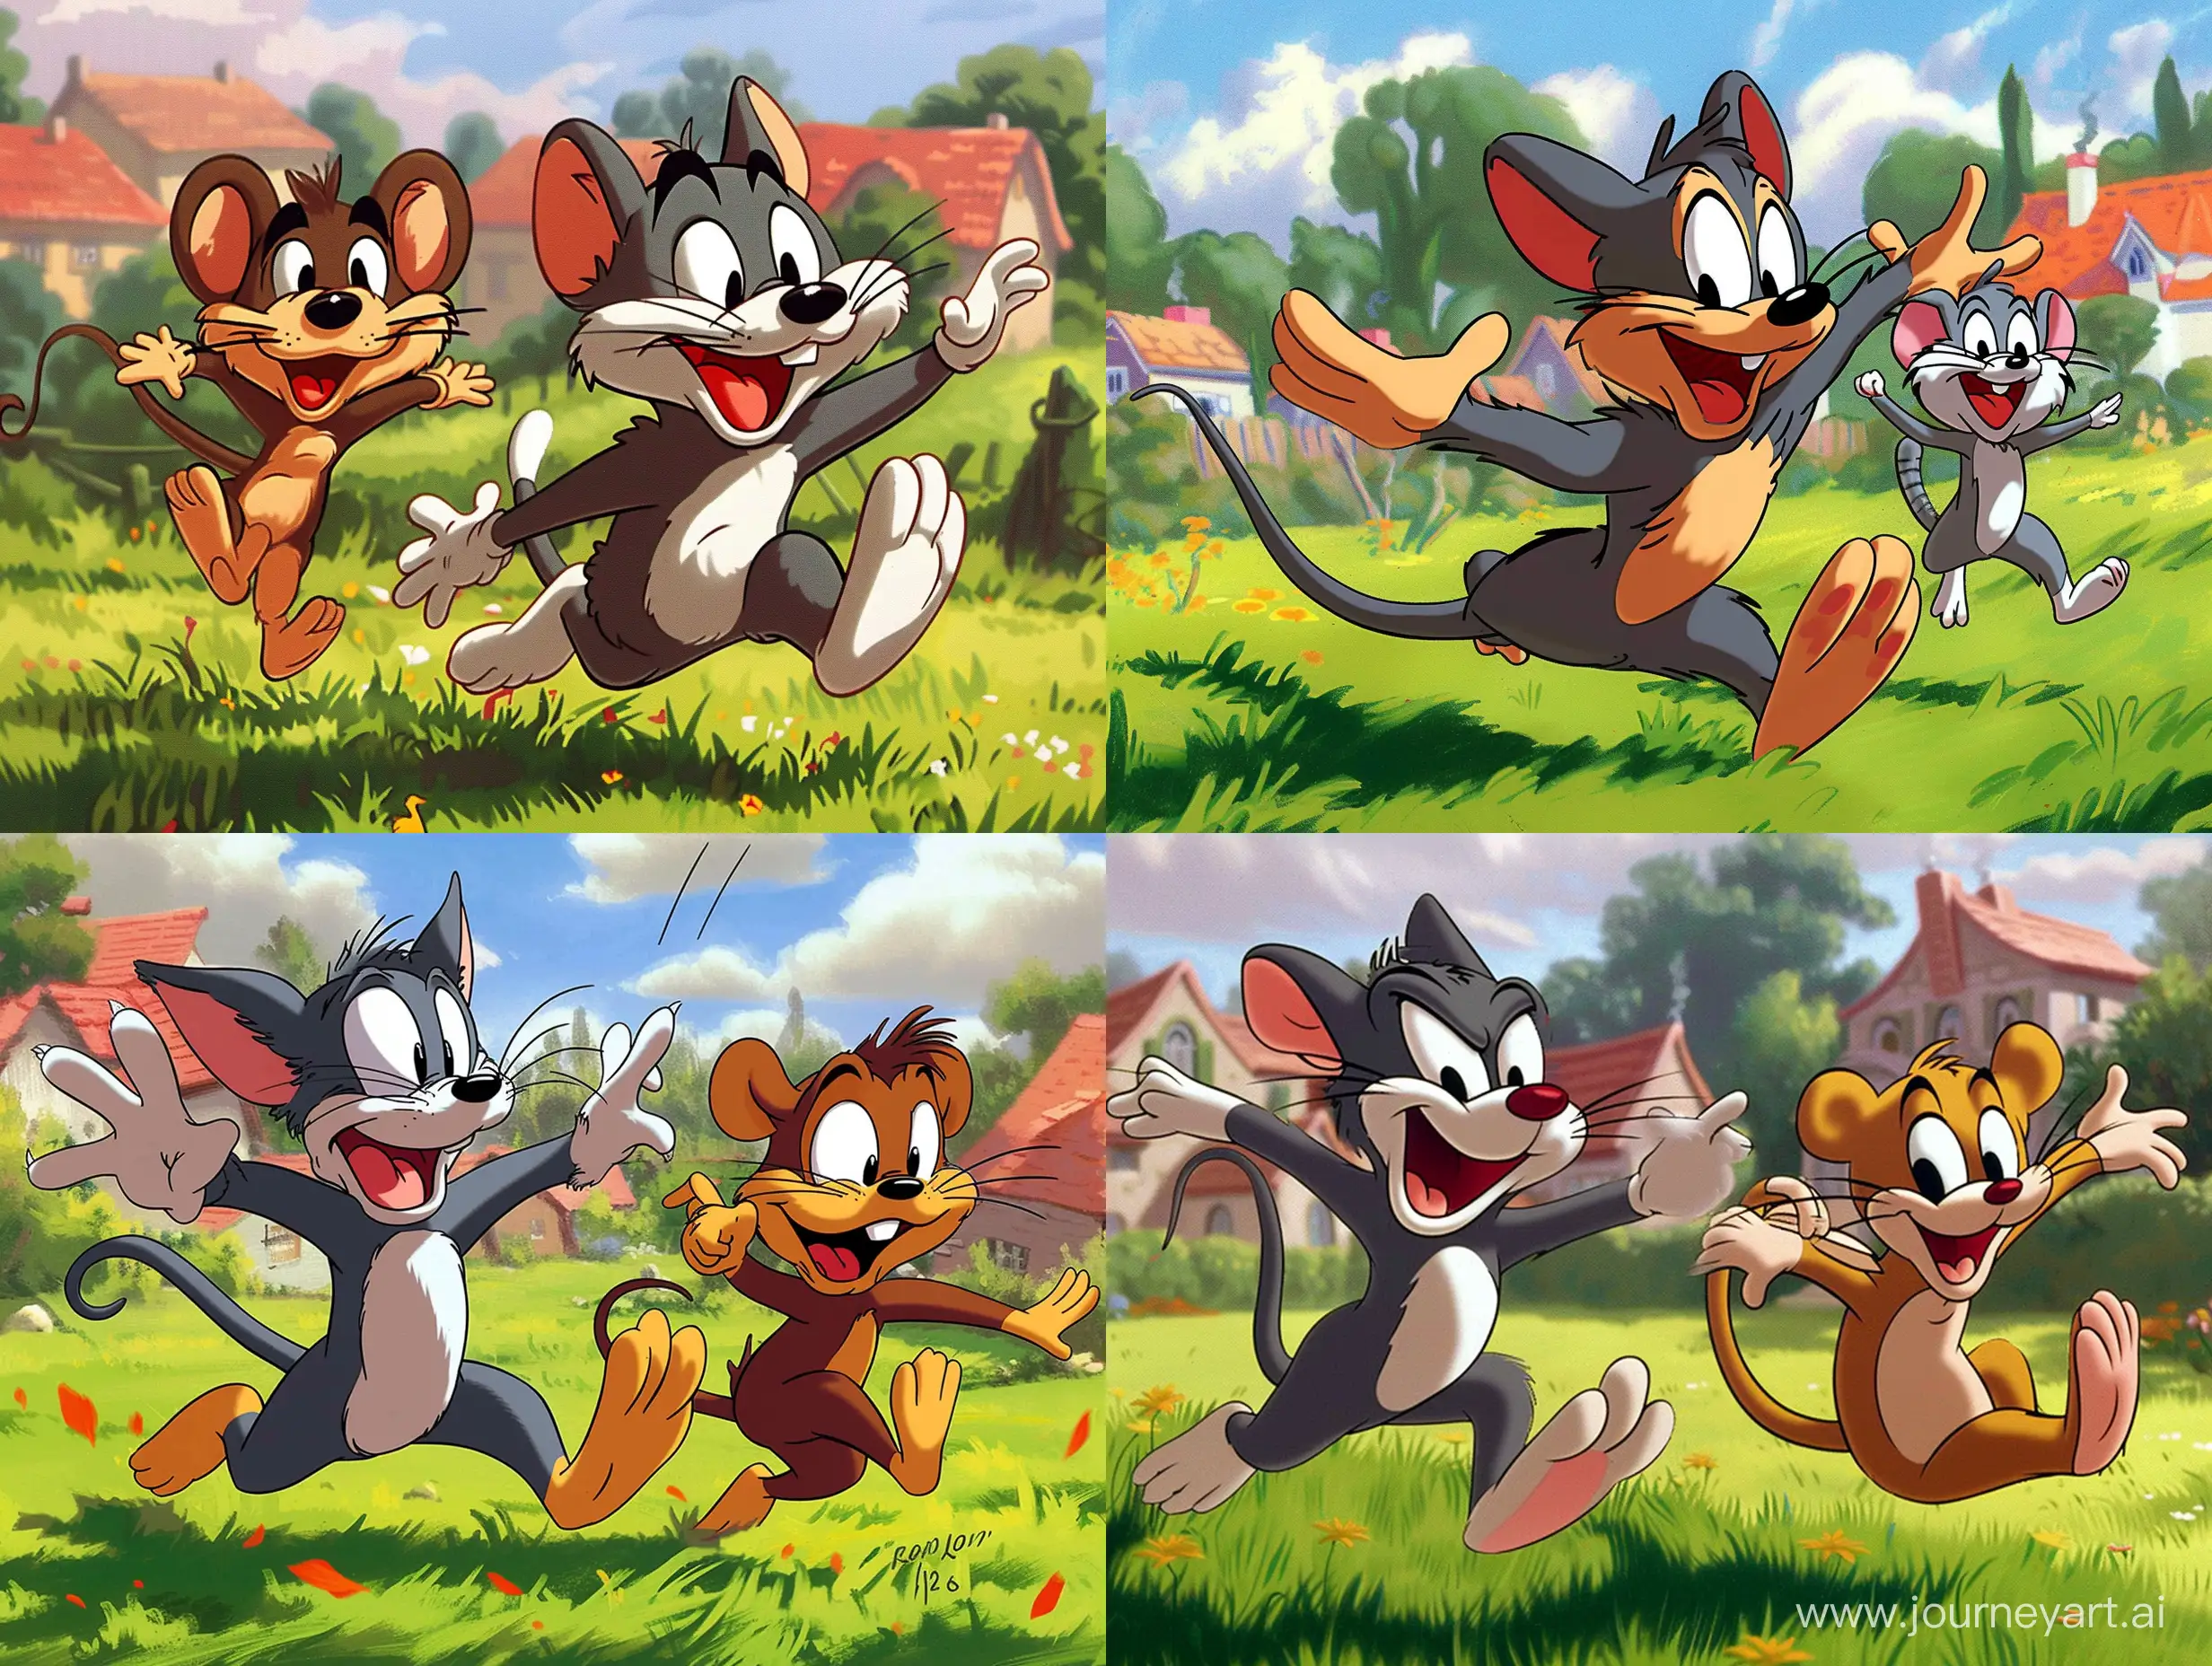 https://live.staticflickr.com/7175/6387951013_97df143678_c.jpg 
In this cartoon scene, two popular characters from Looney Tunes are featured. Tom is shown chasing Jerry as they both run across a grassy field. Tom has his arms outstretched in an attempt to catch Jerry who appears to be laughing and enjoying the moment. The background includes houses and trees, adding to the lively atmosphere of the scene. --s 750